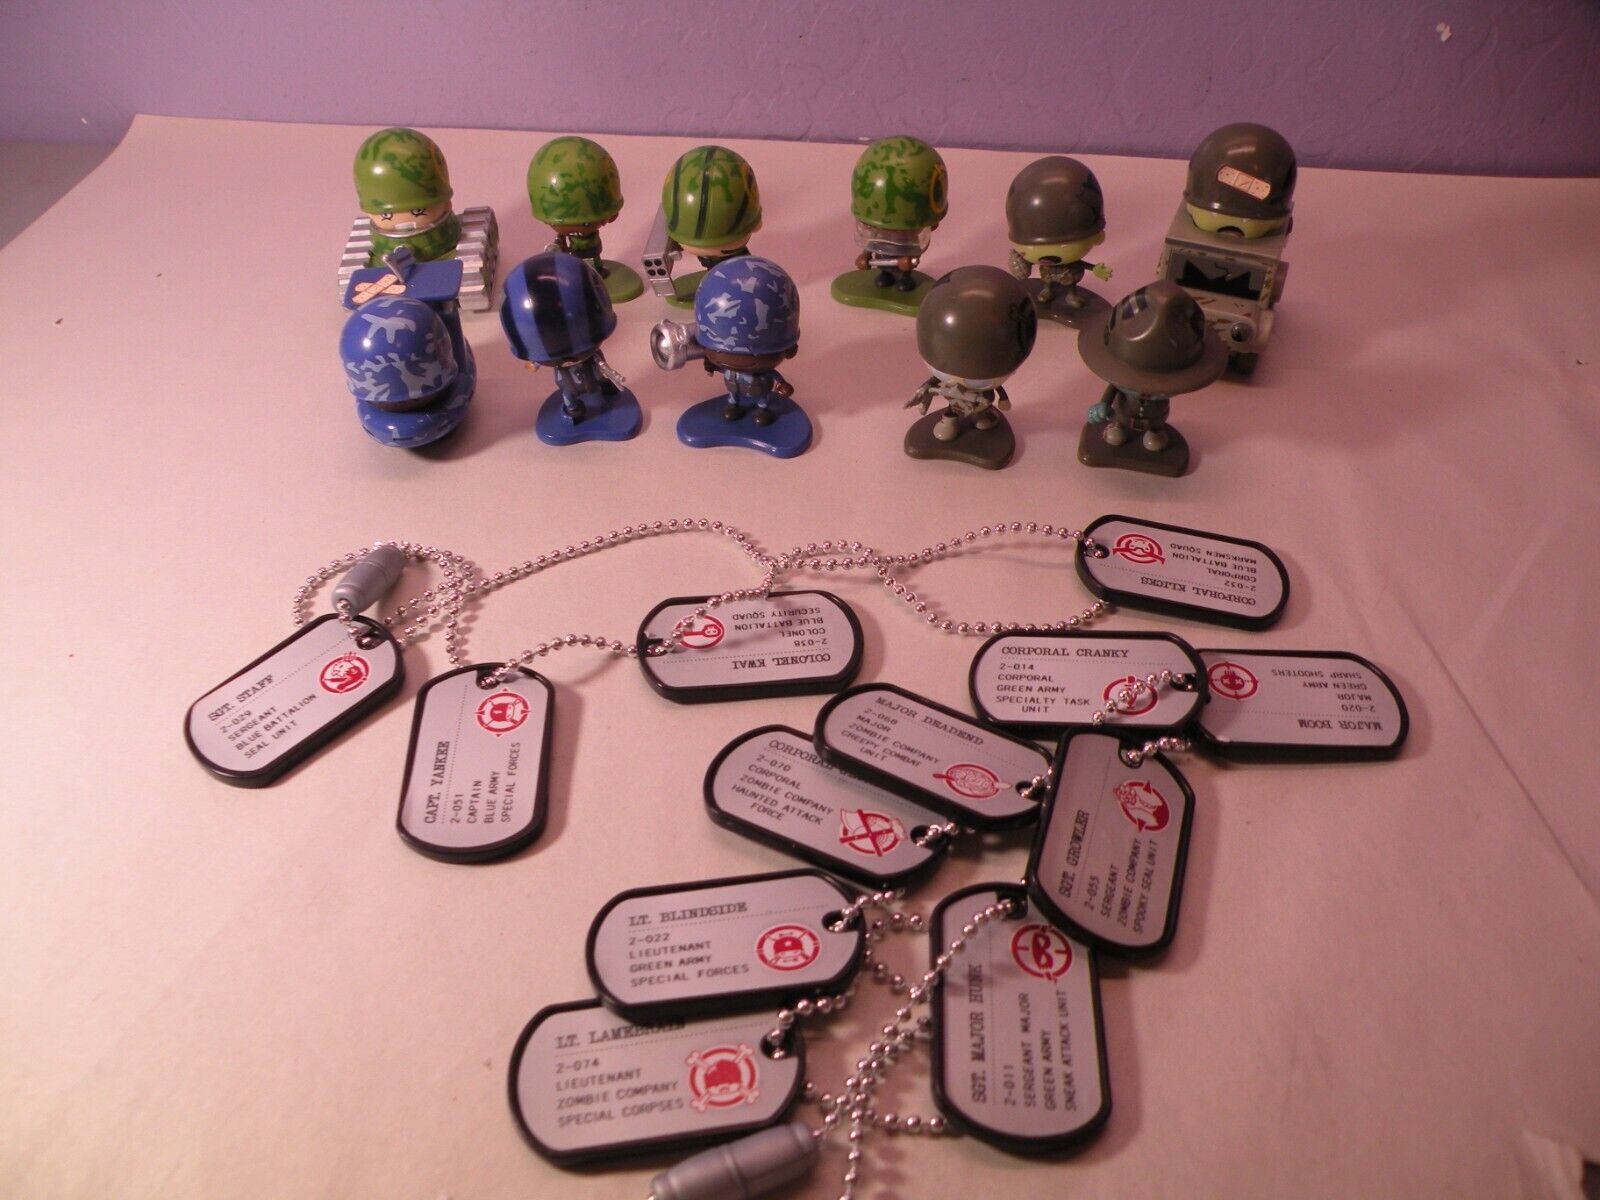 Awesome Little Green Men Lot of 11 with 12 Dog Tags MGA Army Military Figures